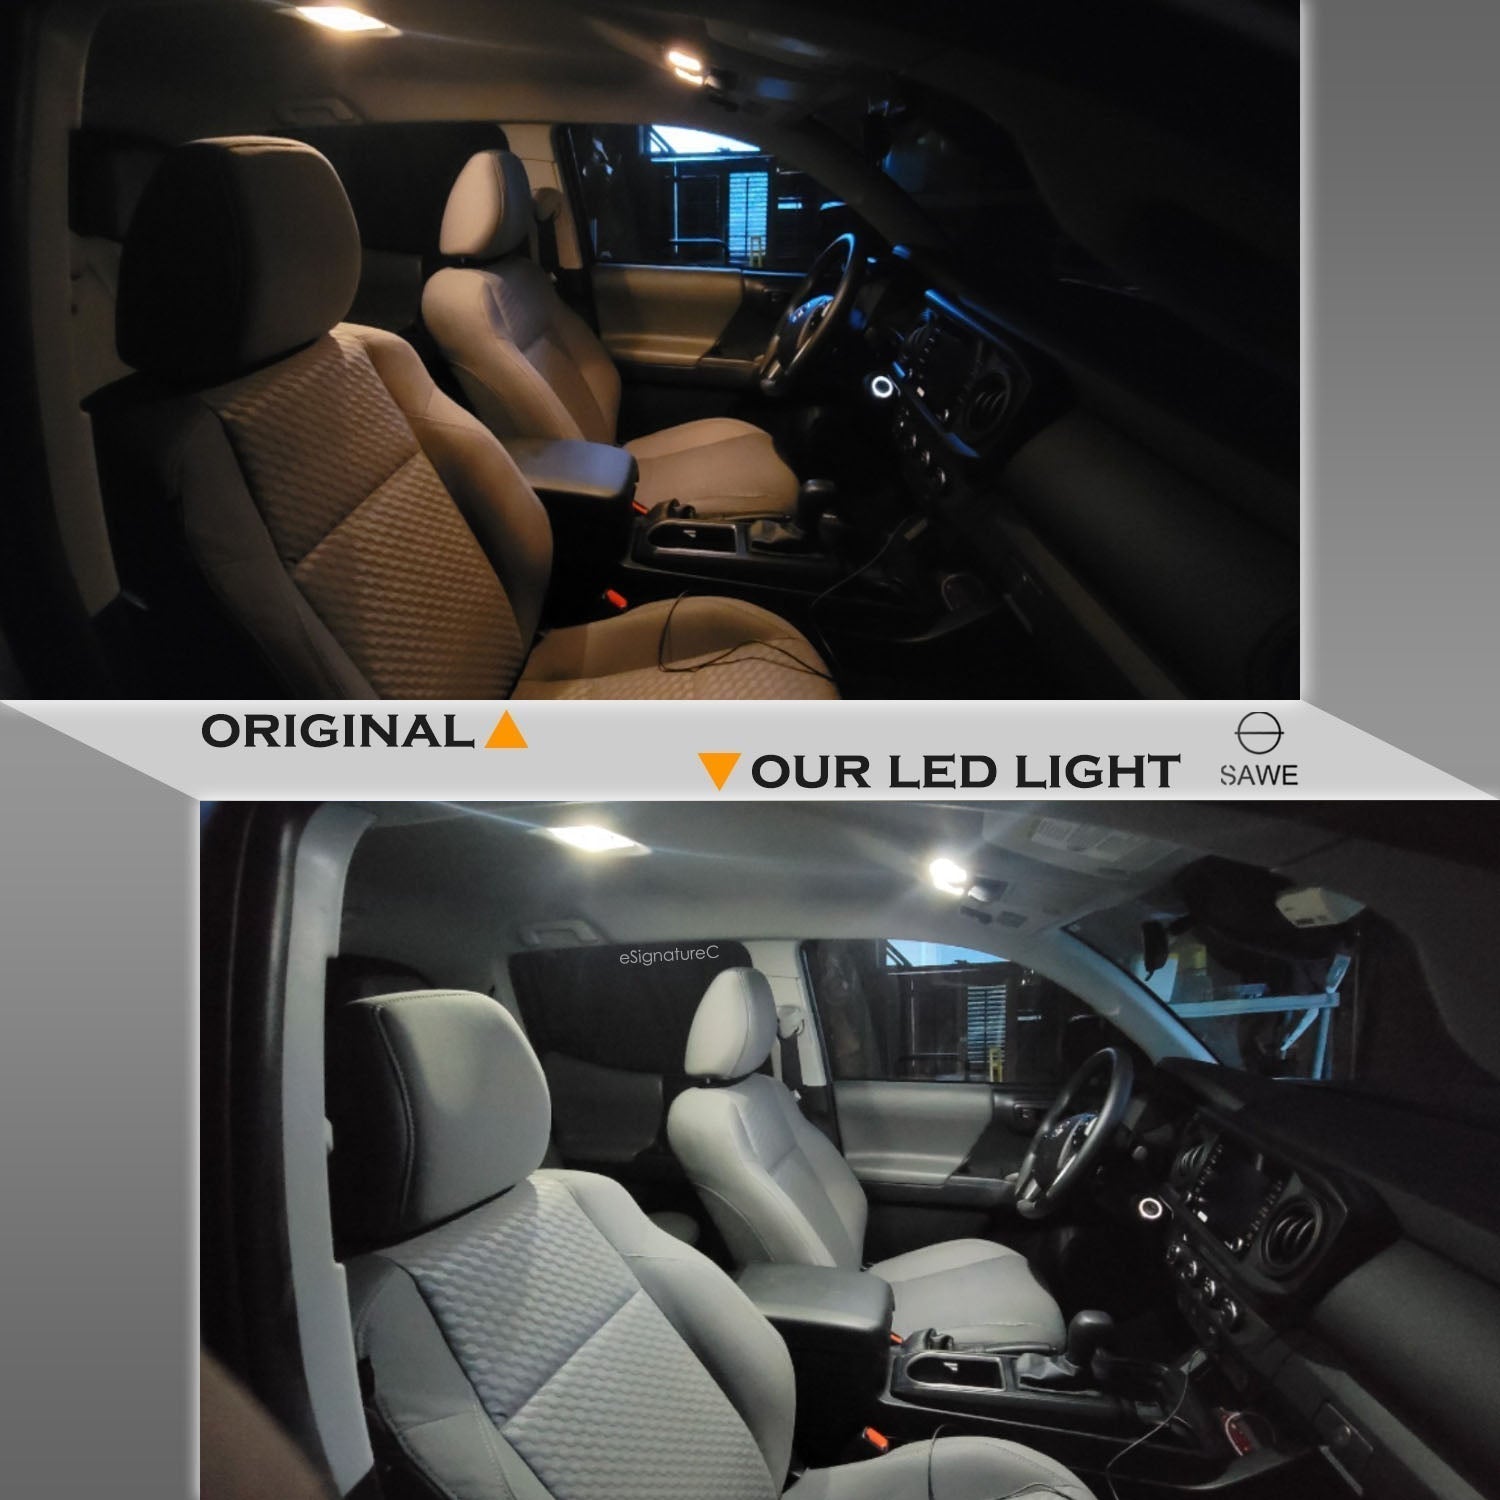 For Subaru Outback Interior LED Lights - Dome & Map Light Bulbs Package Kit for 2015 - 2019 - White